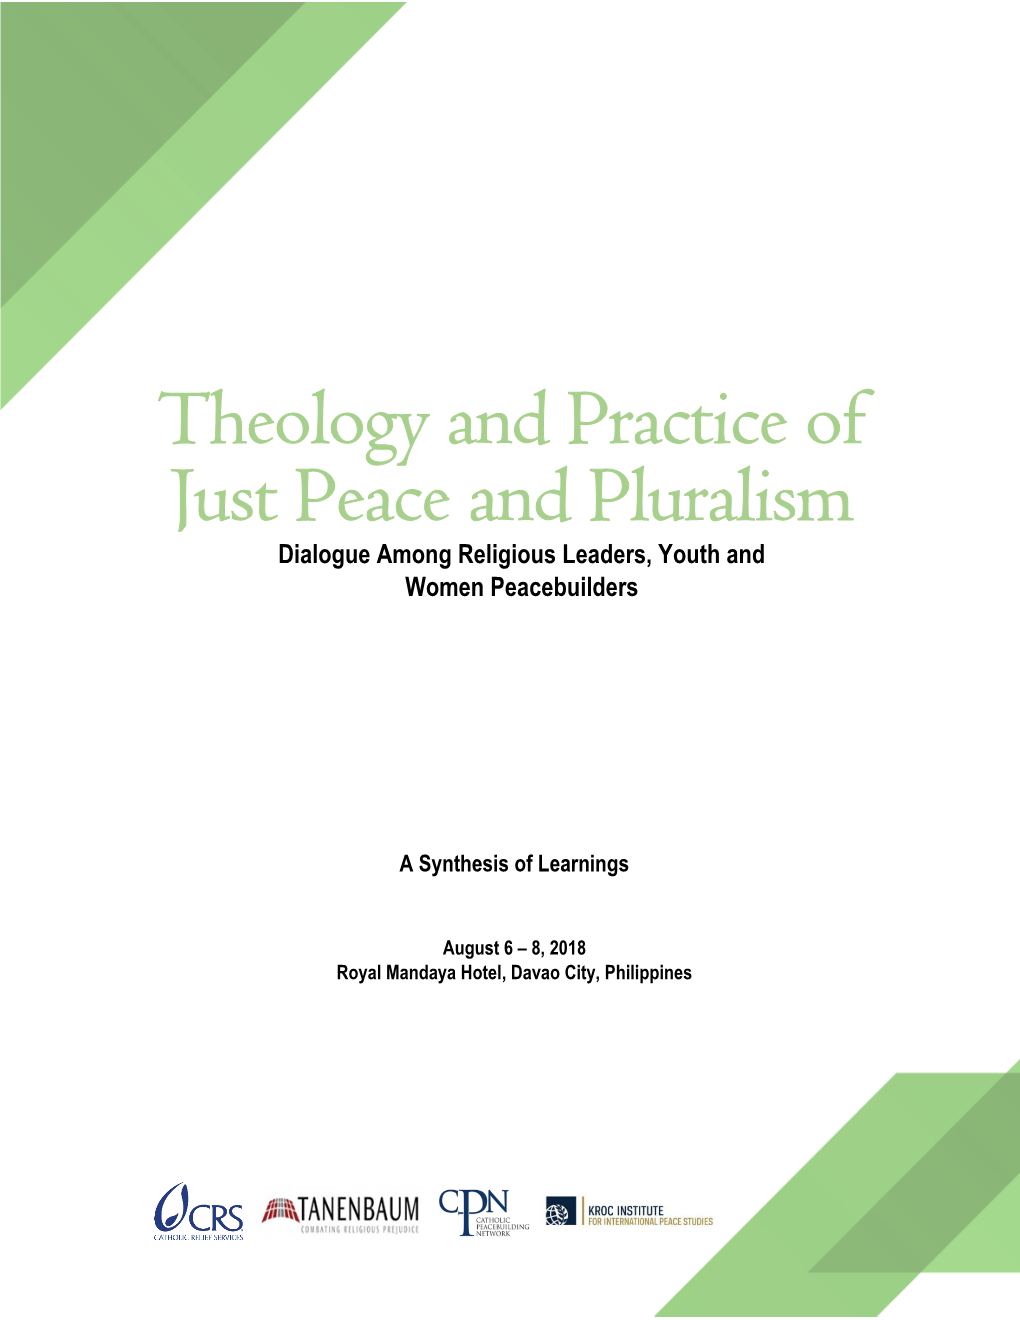 Theology and Practice of Just Peace and Pluralism in the Context of the New Forms of Violence, Extremism and Radicalization